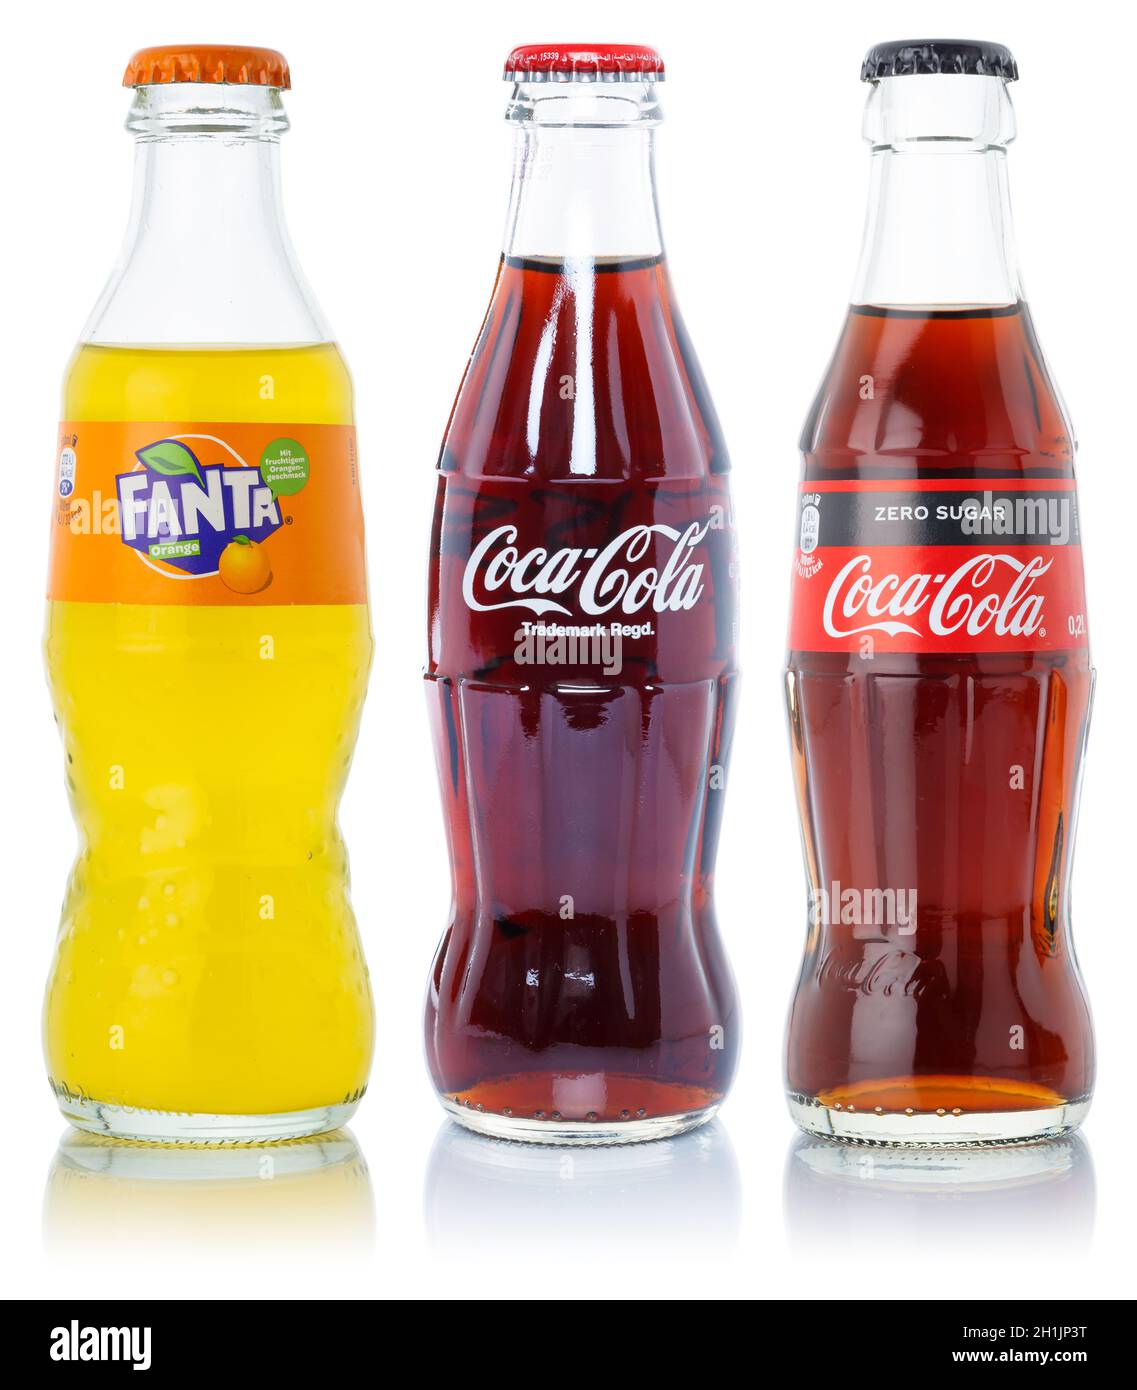 Stuttgart, Germany - August 24, 2021: Coca Cola Coca-Cola Fanta products lemonade drinks in bottles isolated on a white background in Stuttgart, Germa Stock Photo